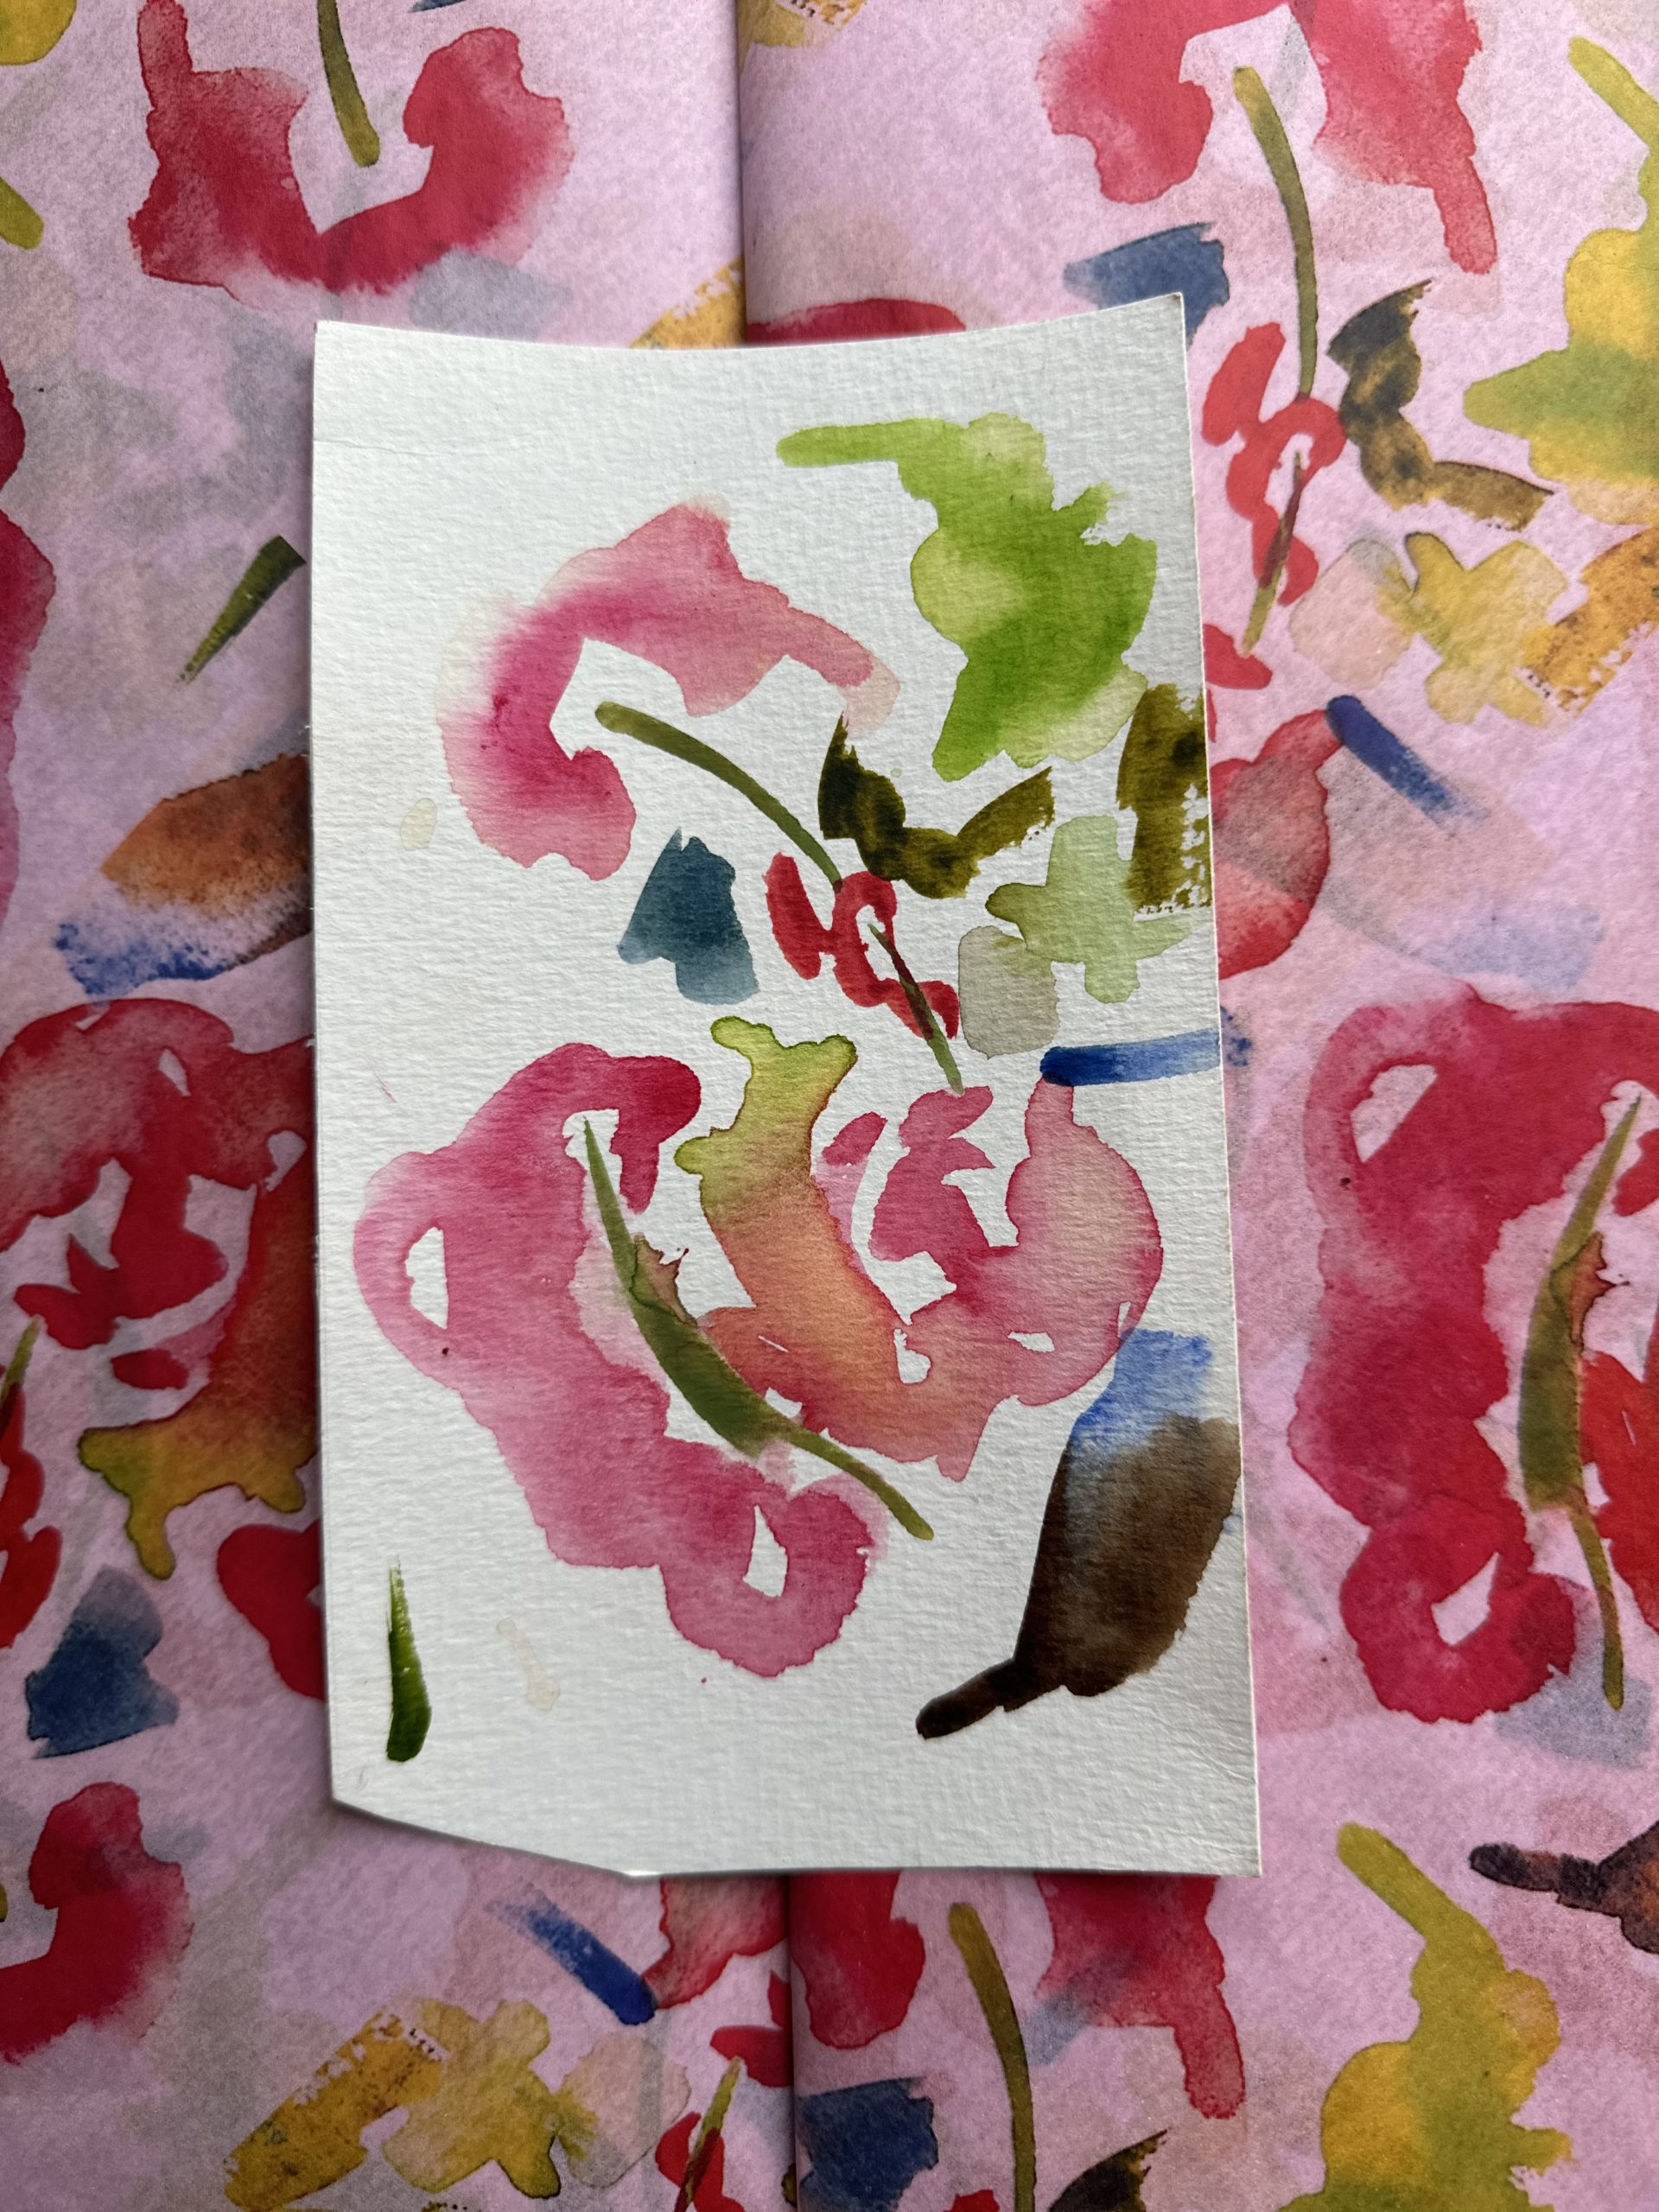 How to Make Your Own Custom Tissue Paper, How to Get Your Art On Tissue Paper, 5 Reasons to Print Your Art on Tissue Paper, How to Print Your Art on Tissue Paper For Less, 5 Custom Tissue Paper Resources